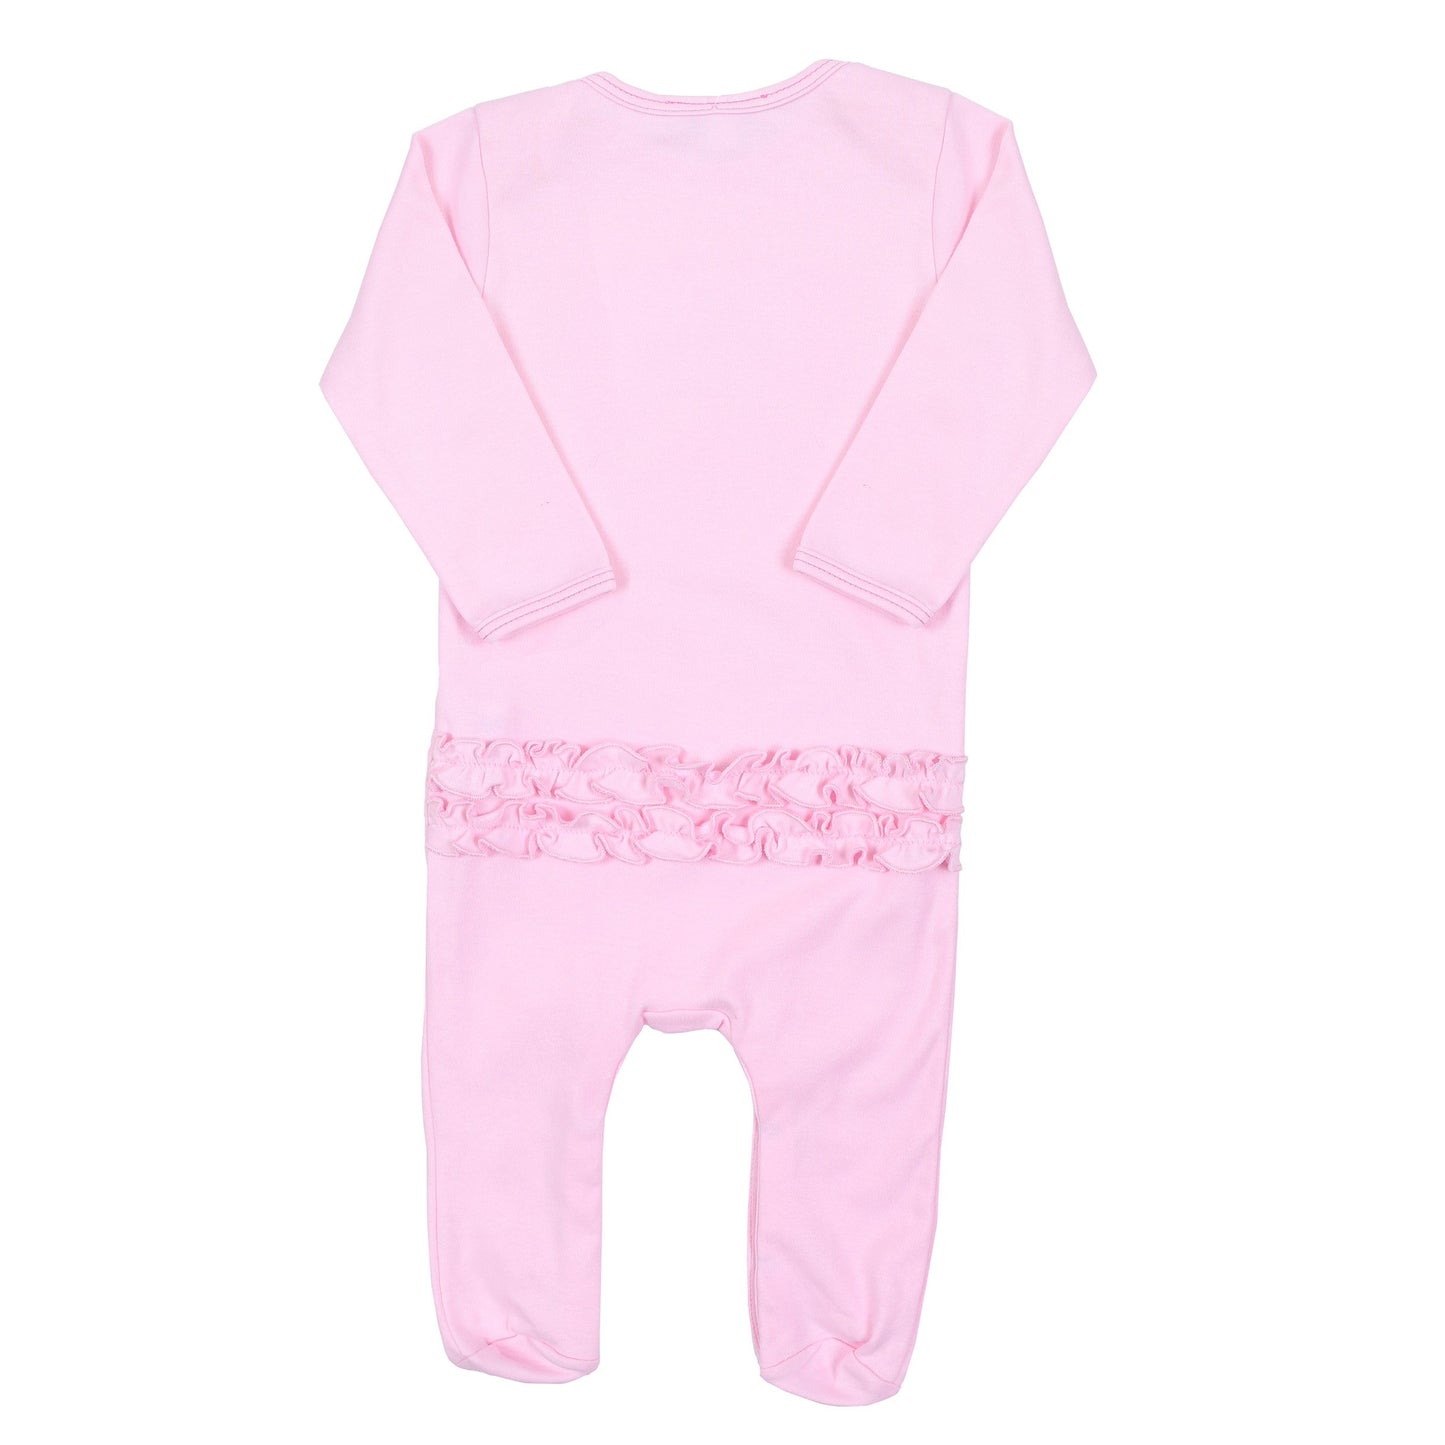 Magnolia Baby Baby Girls Lovely Princess Applique Ruffle Footie Pink 6 Months